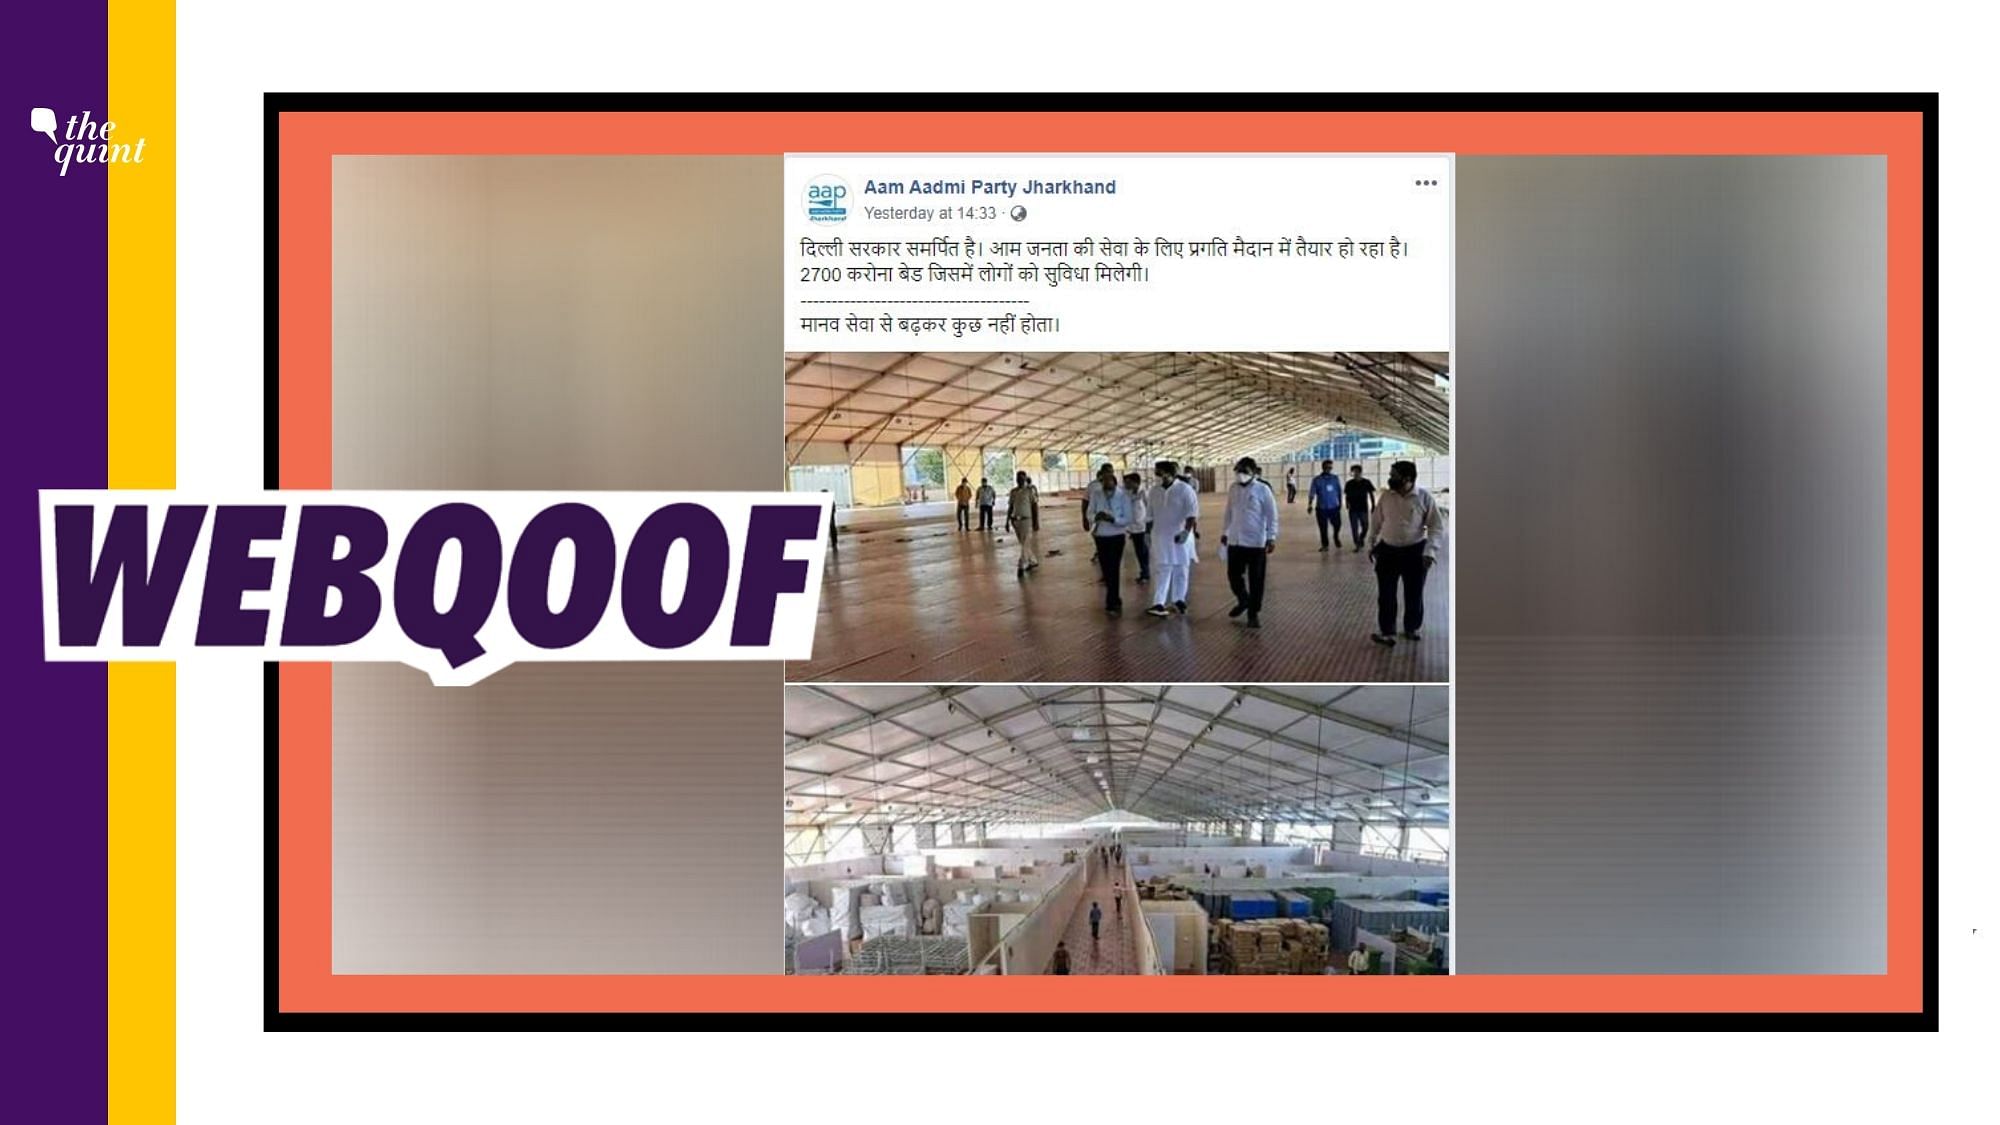 On 15 June, the Jharkhand unit of Aam Aadmi Party (AAP) shared images from a coronavirus facility in Mumbai as those from one being constructed at Pragati Maidan in Delhi.